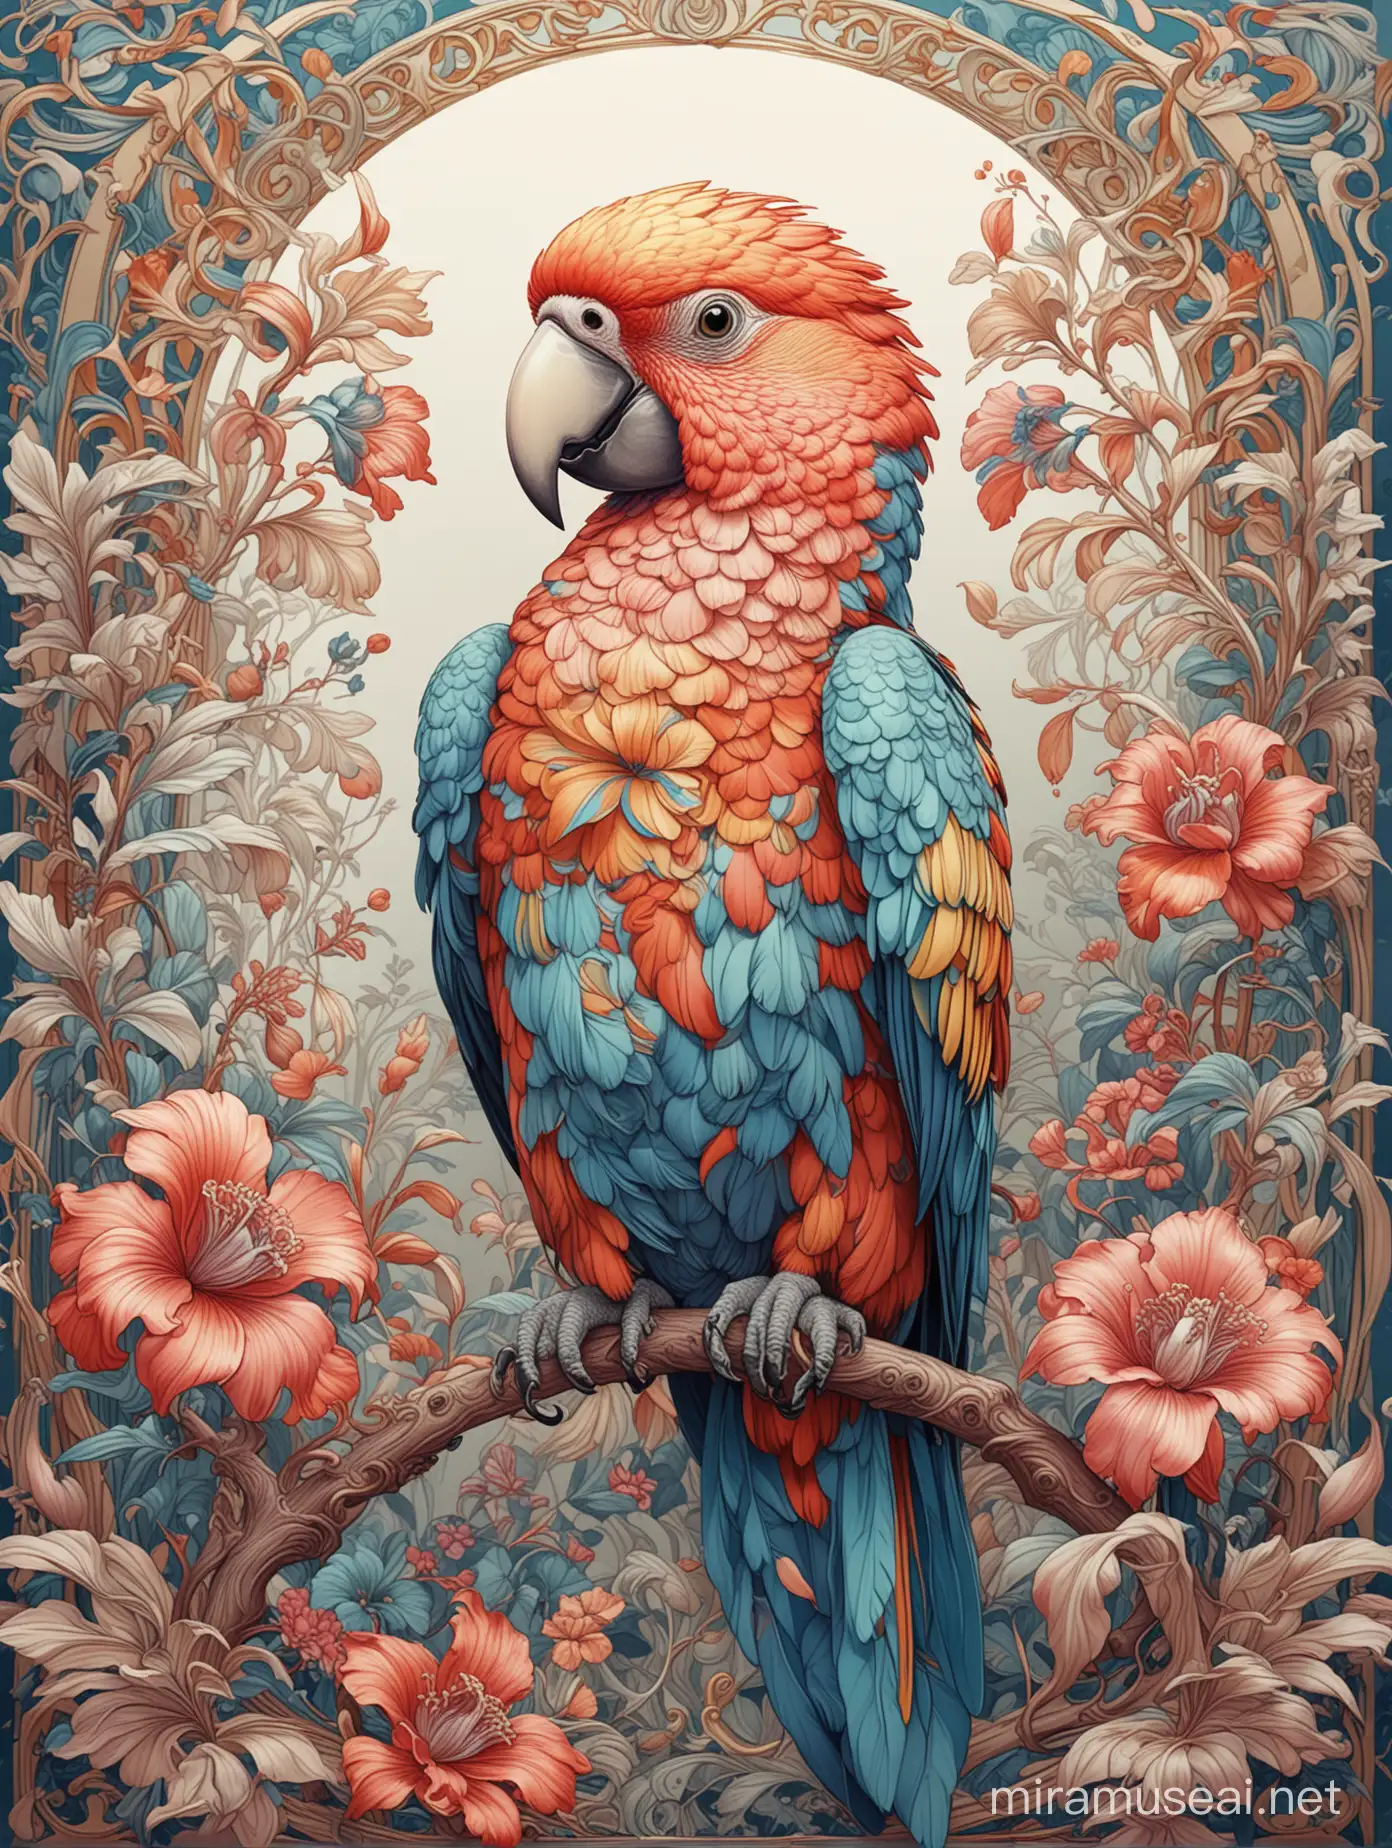 Ethereal Parrot Stunning Fantasy Art in Vibrant Colors Inspired by James Jean